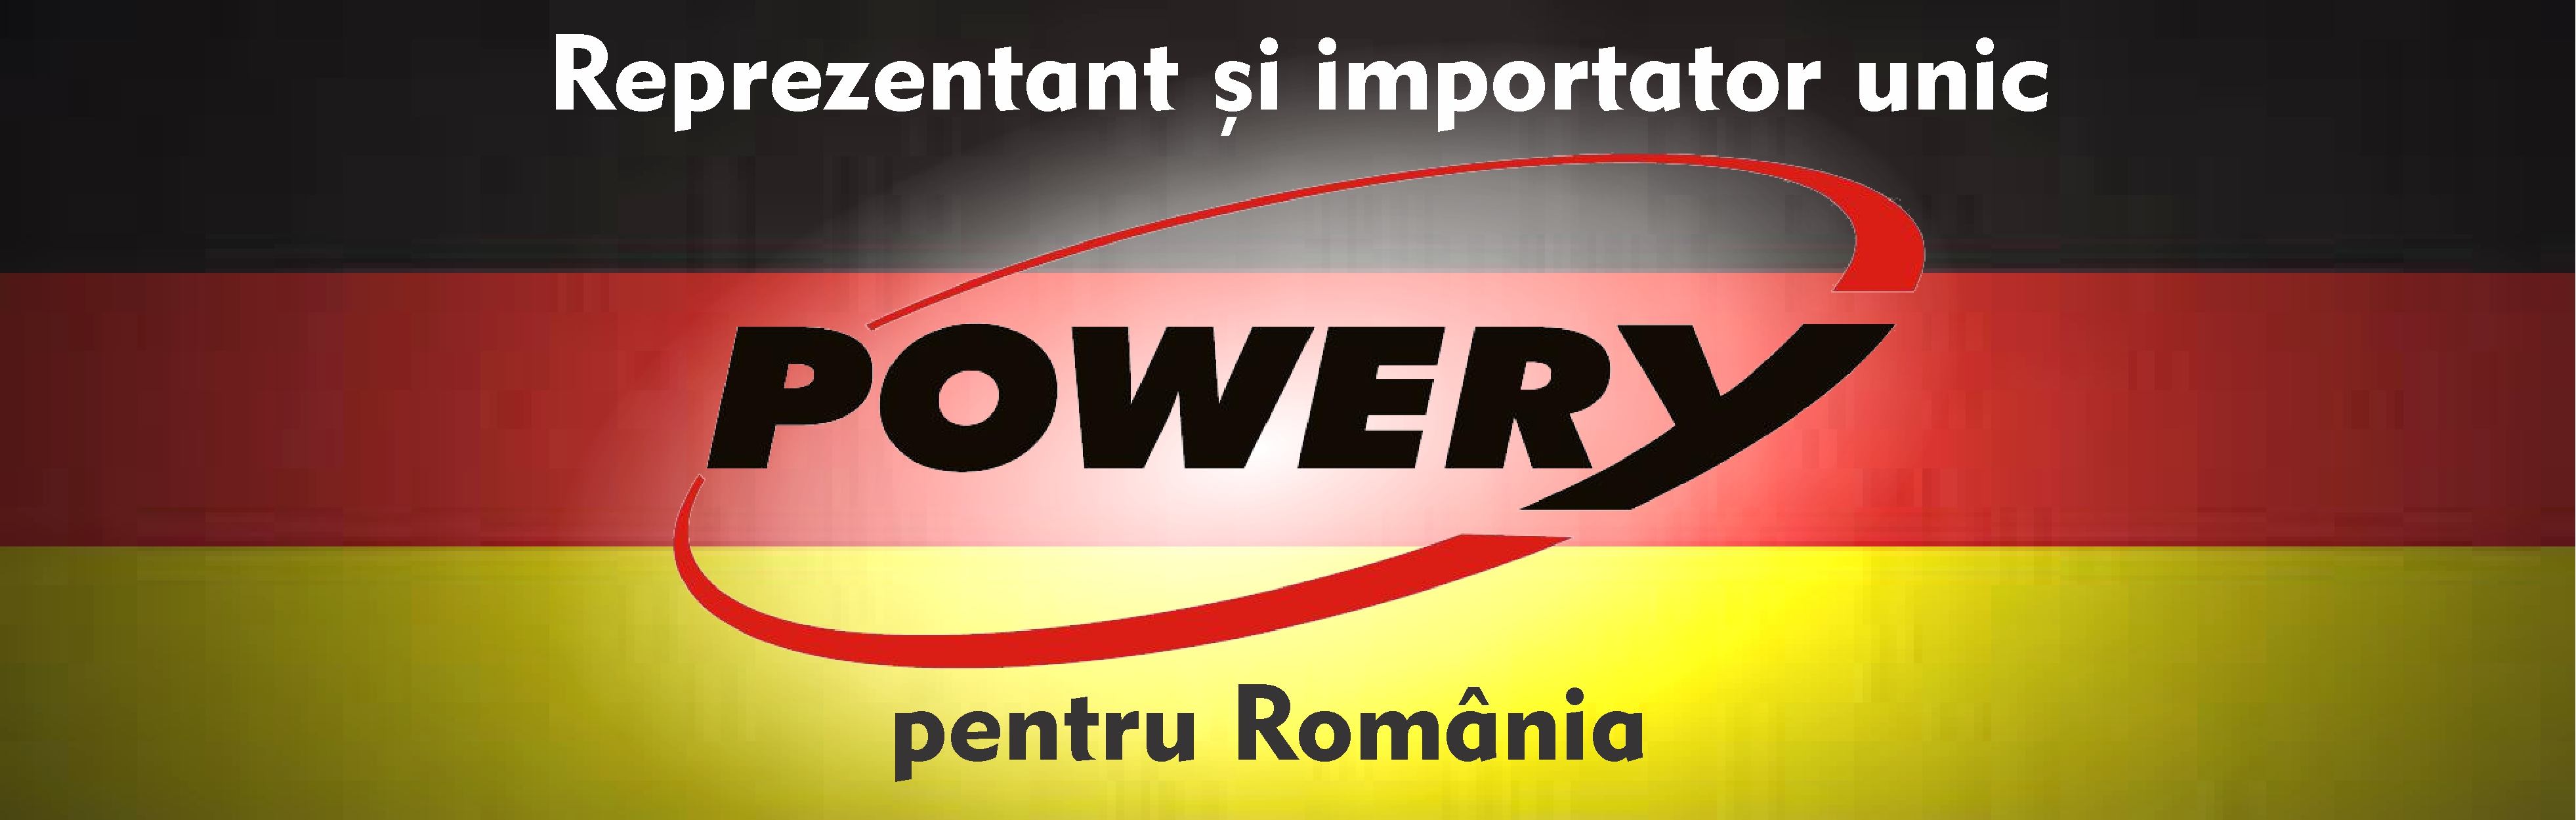 Powery Official representation